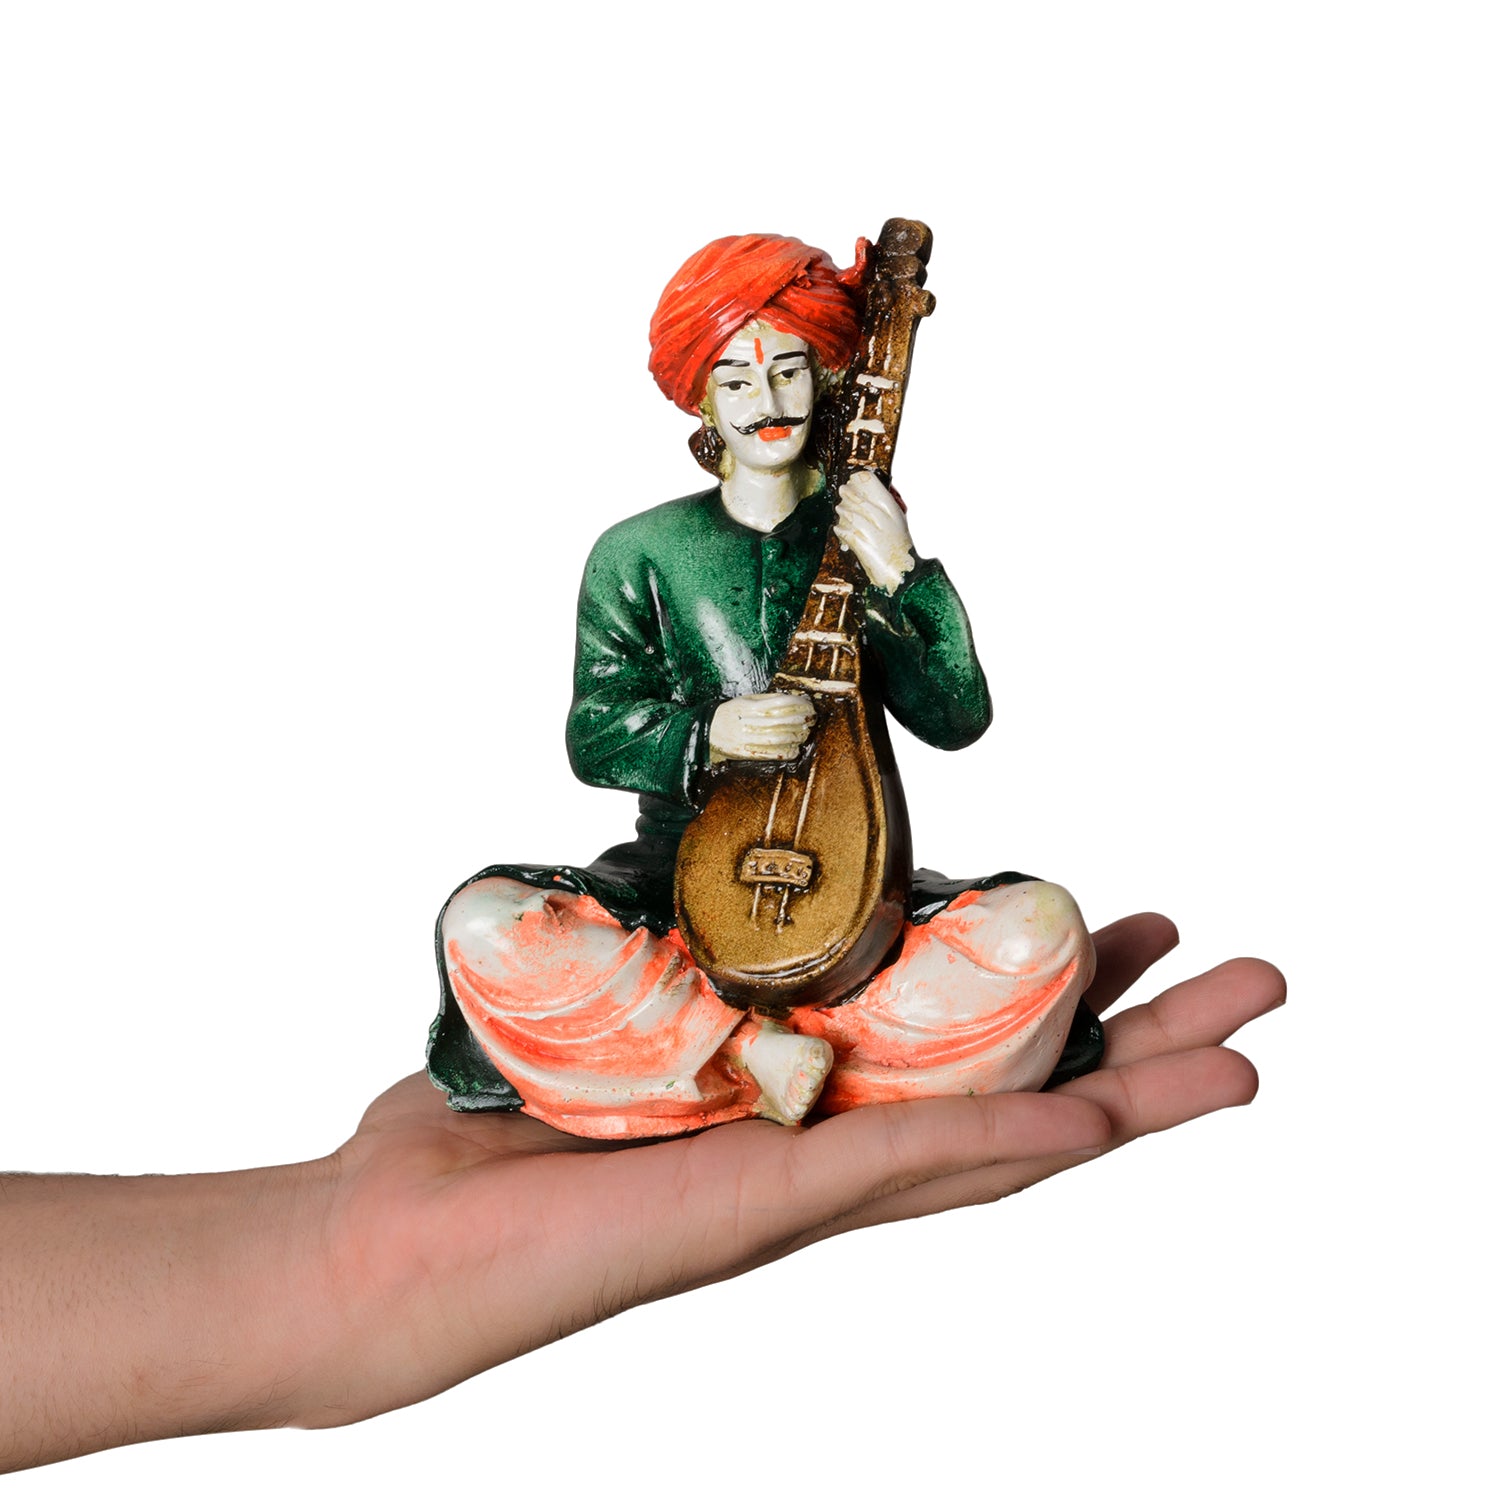 Polyresin Rajasthani Men playing Sitar Musical Instrument Handcrafted Decorative Showpiece 5